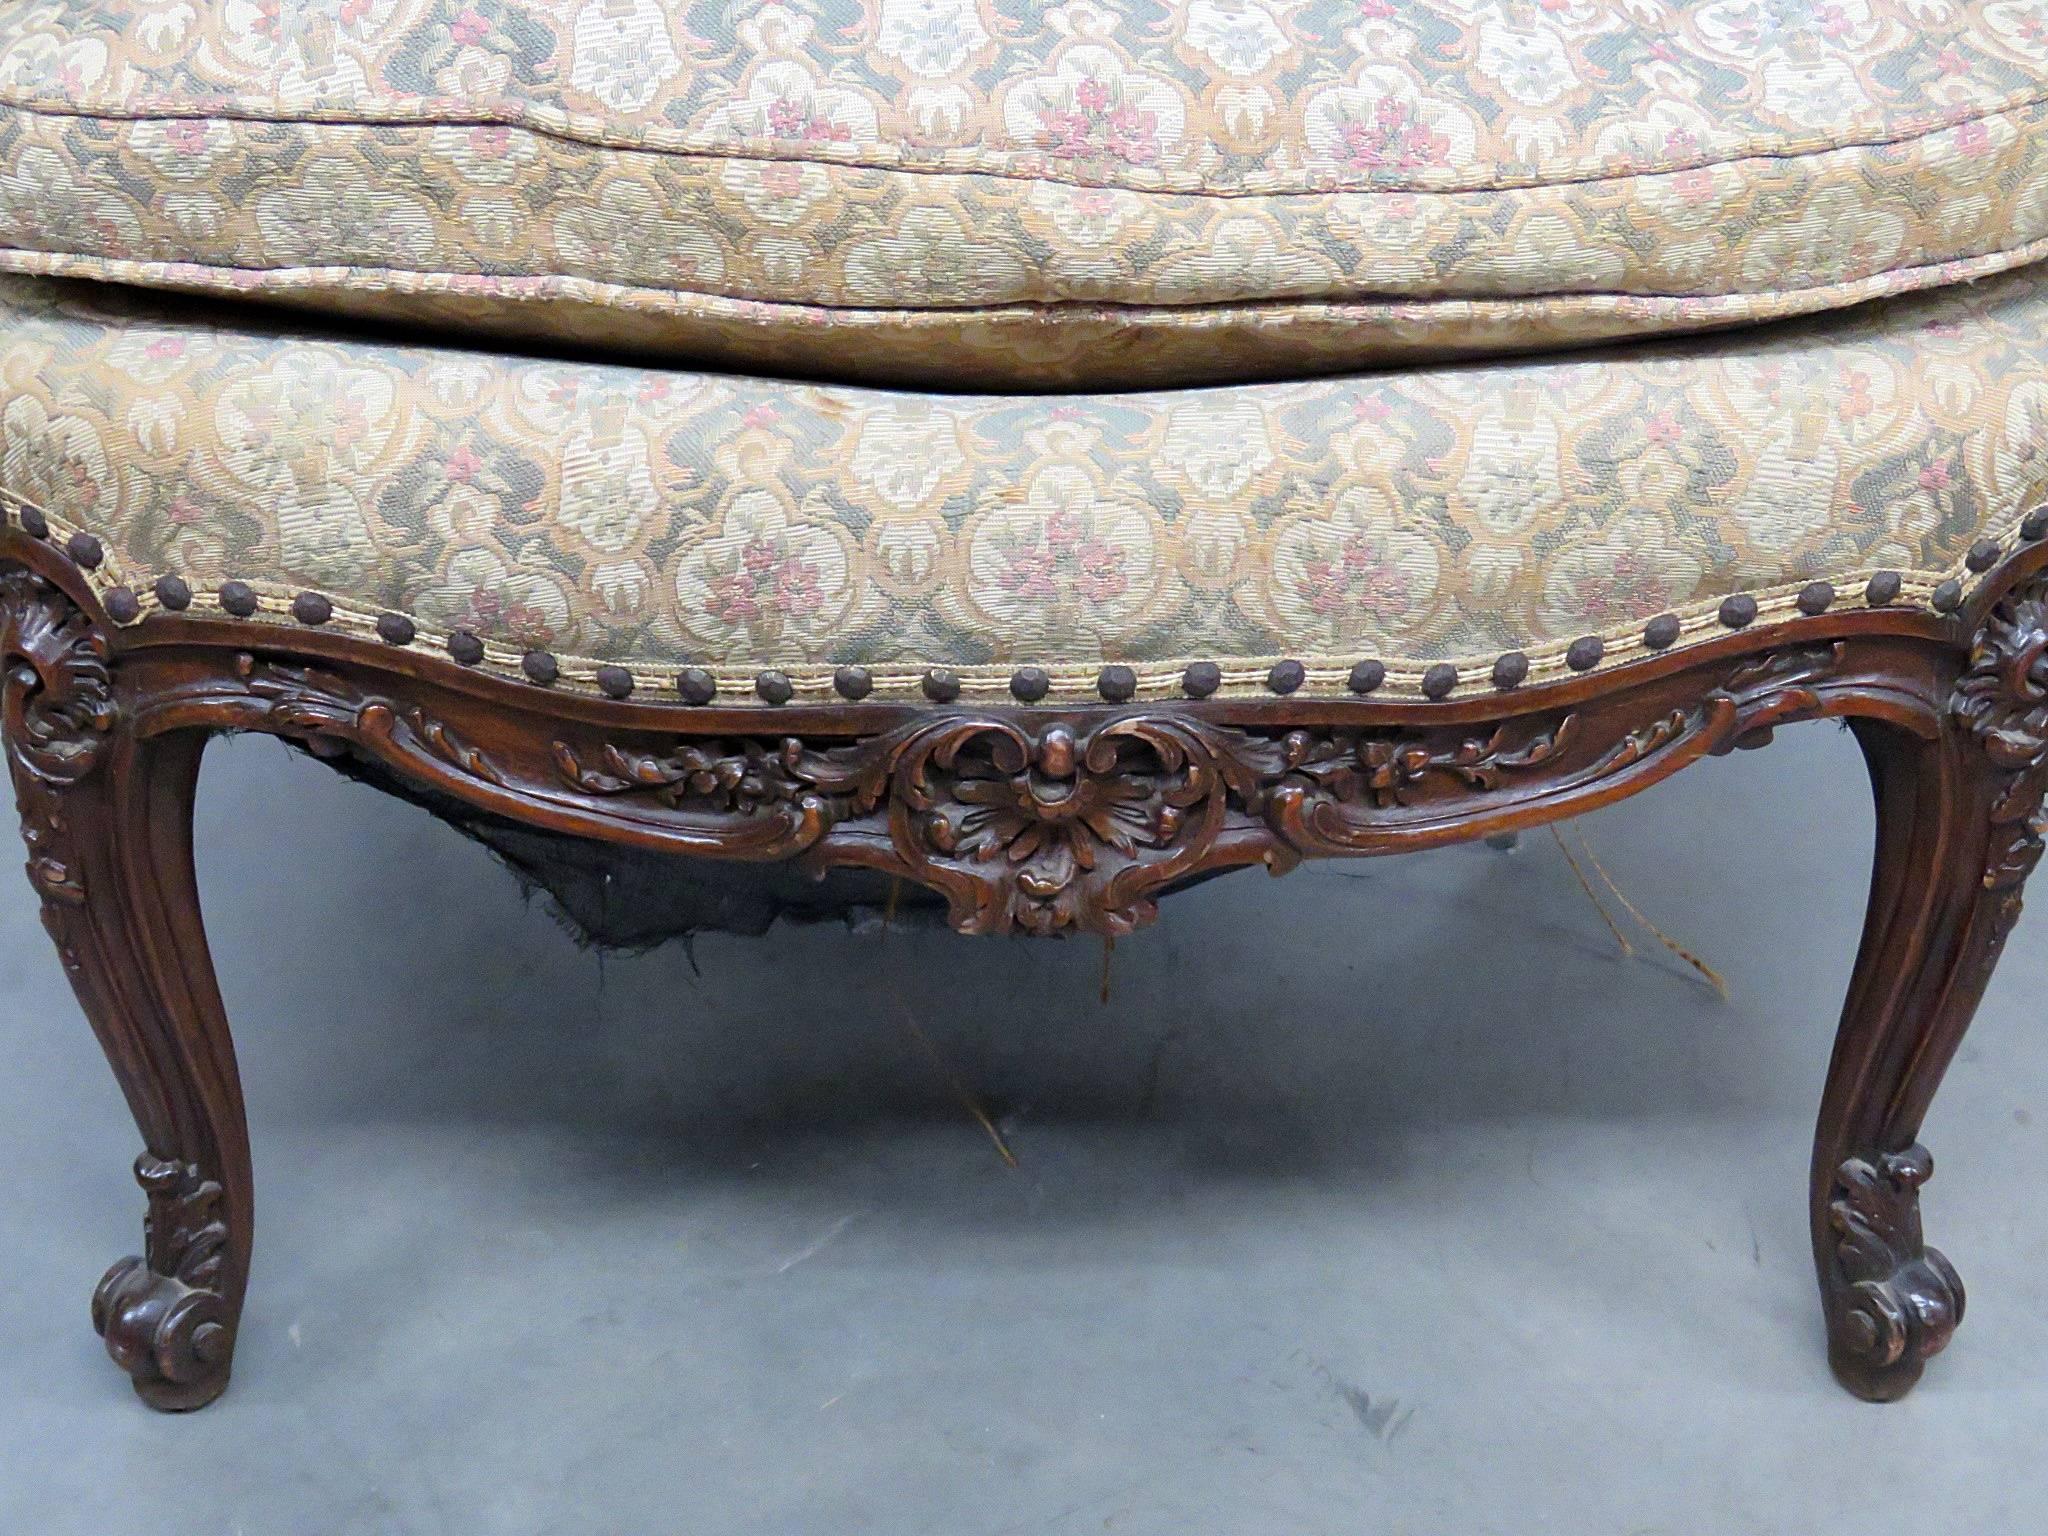 french parlor chairs